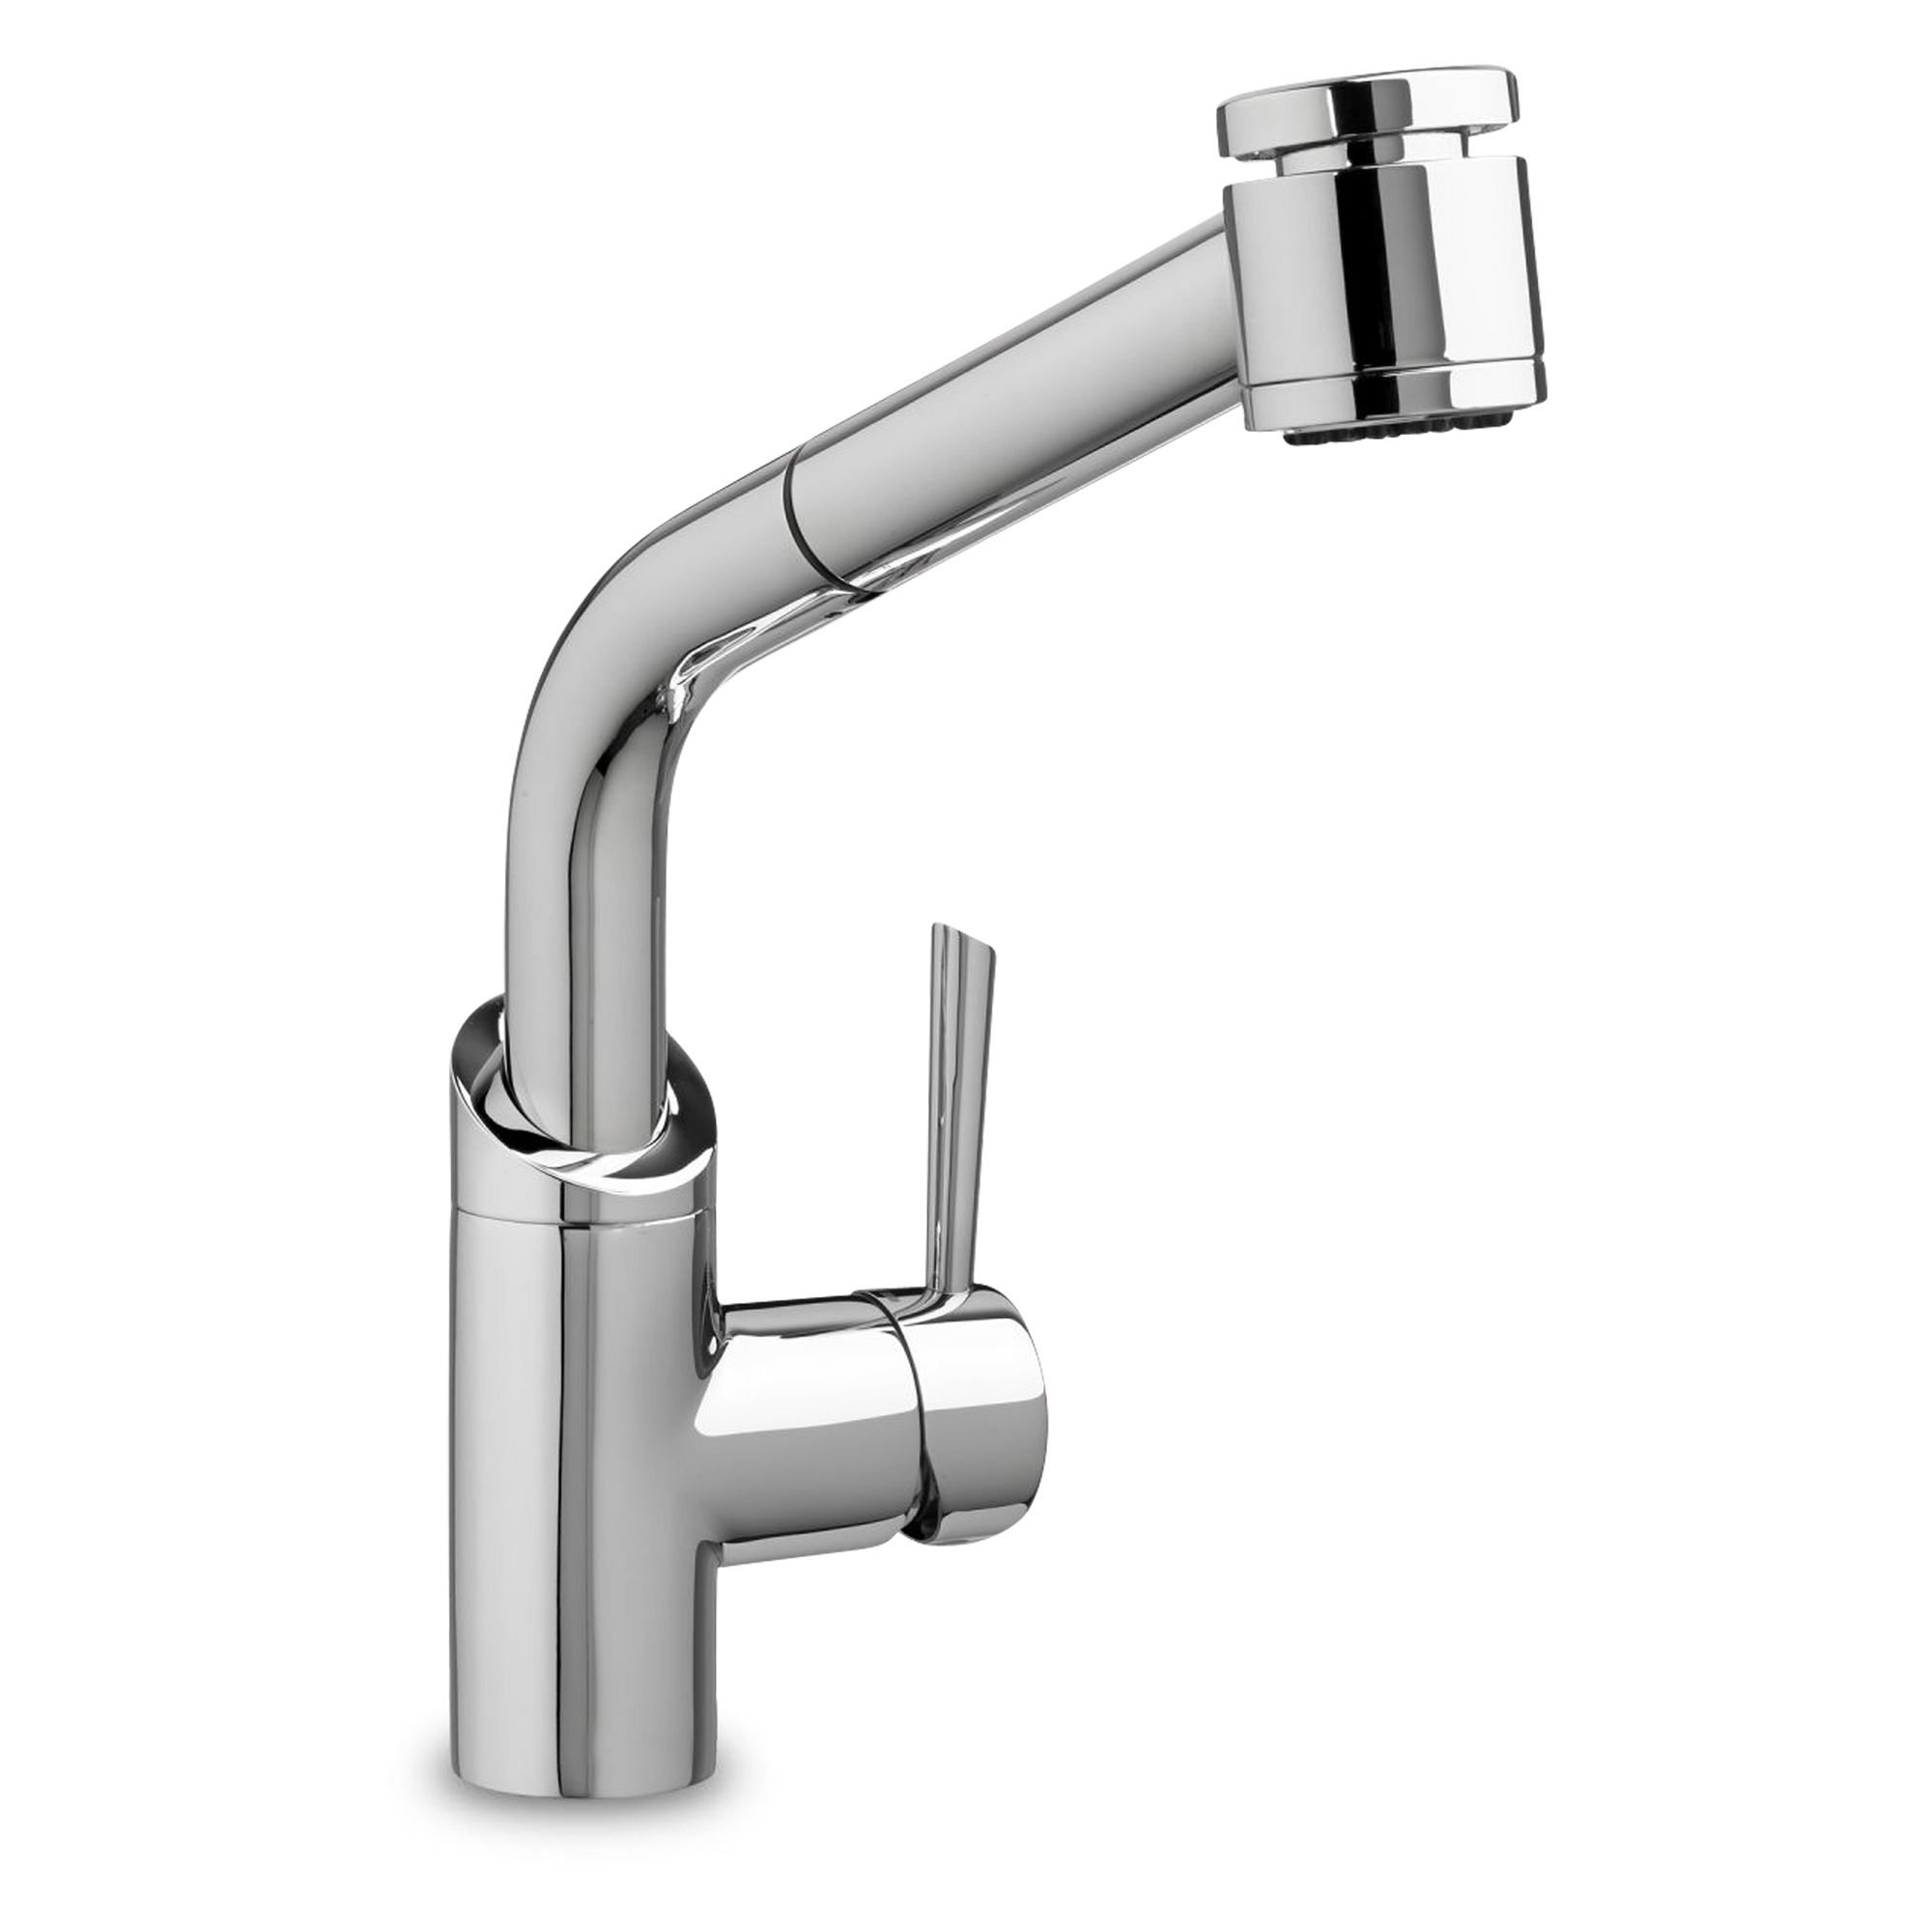 A sleek and modern, two-function, pull-out kitchen faucet in polished chrome.